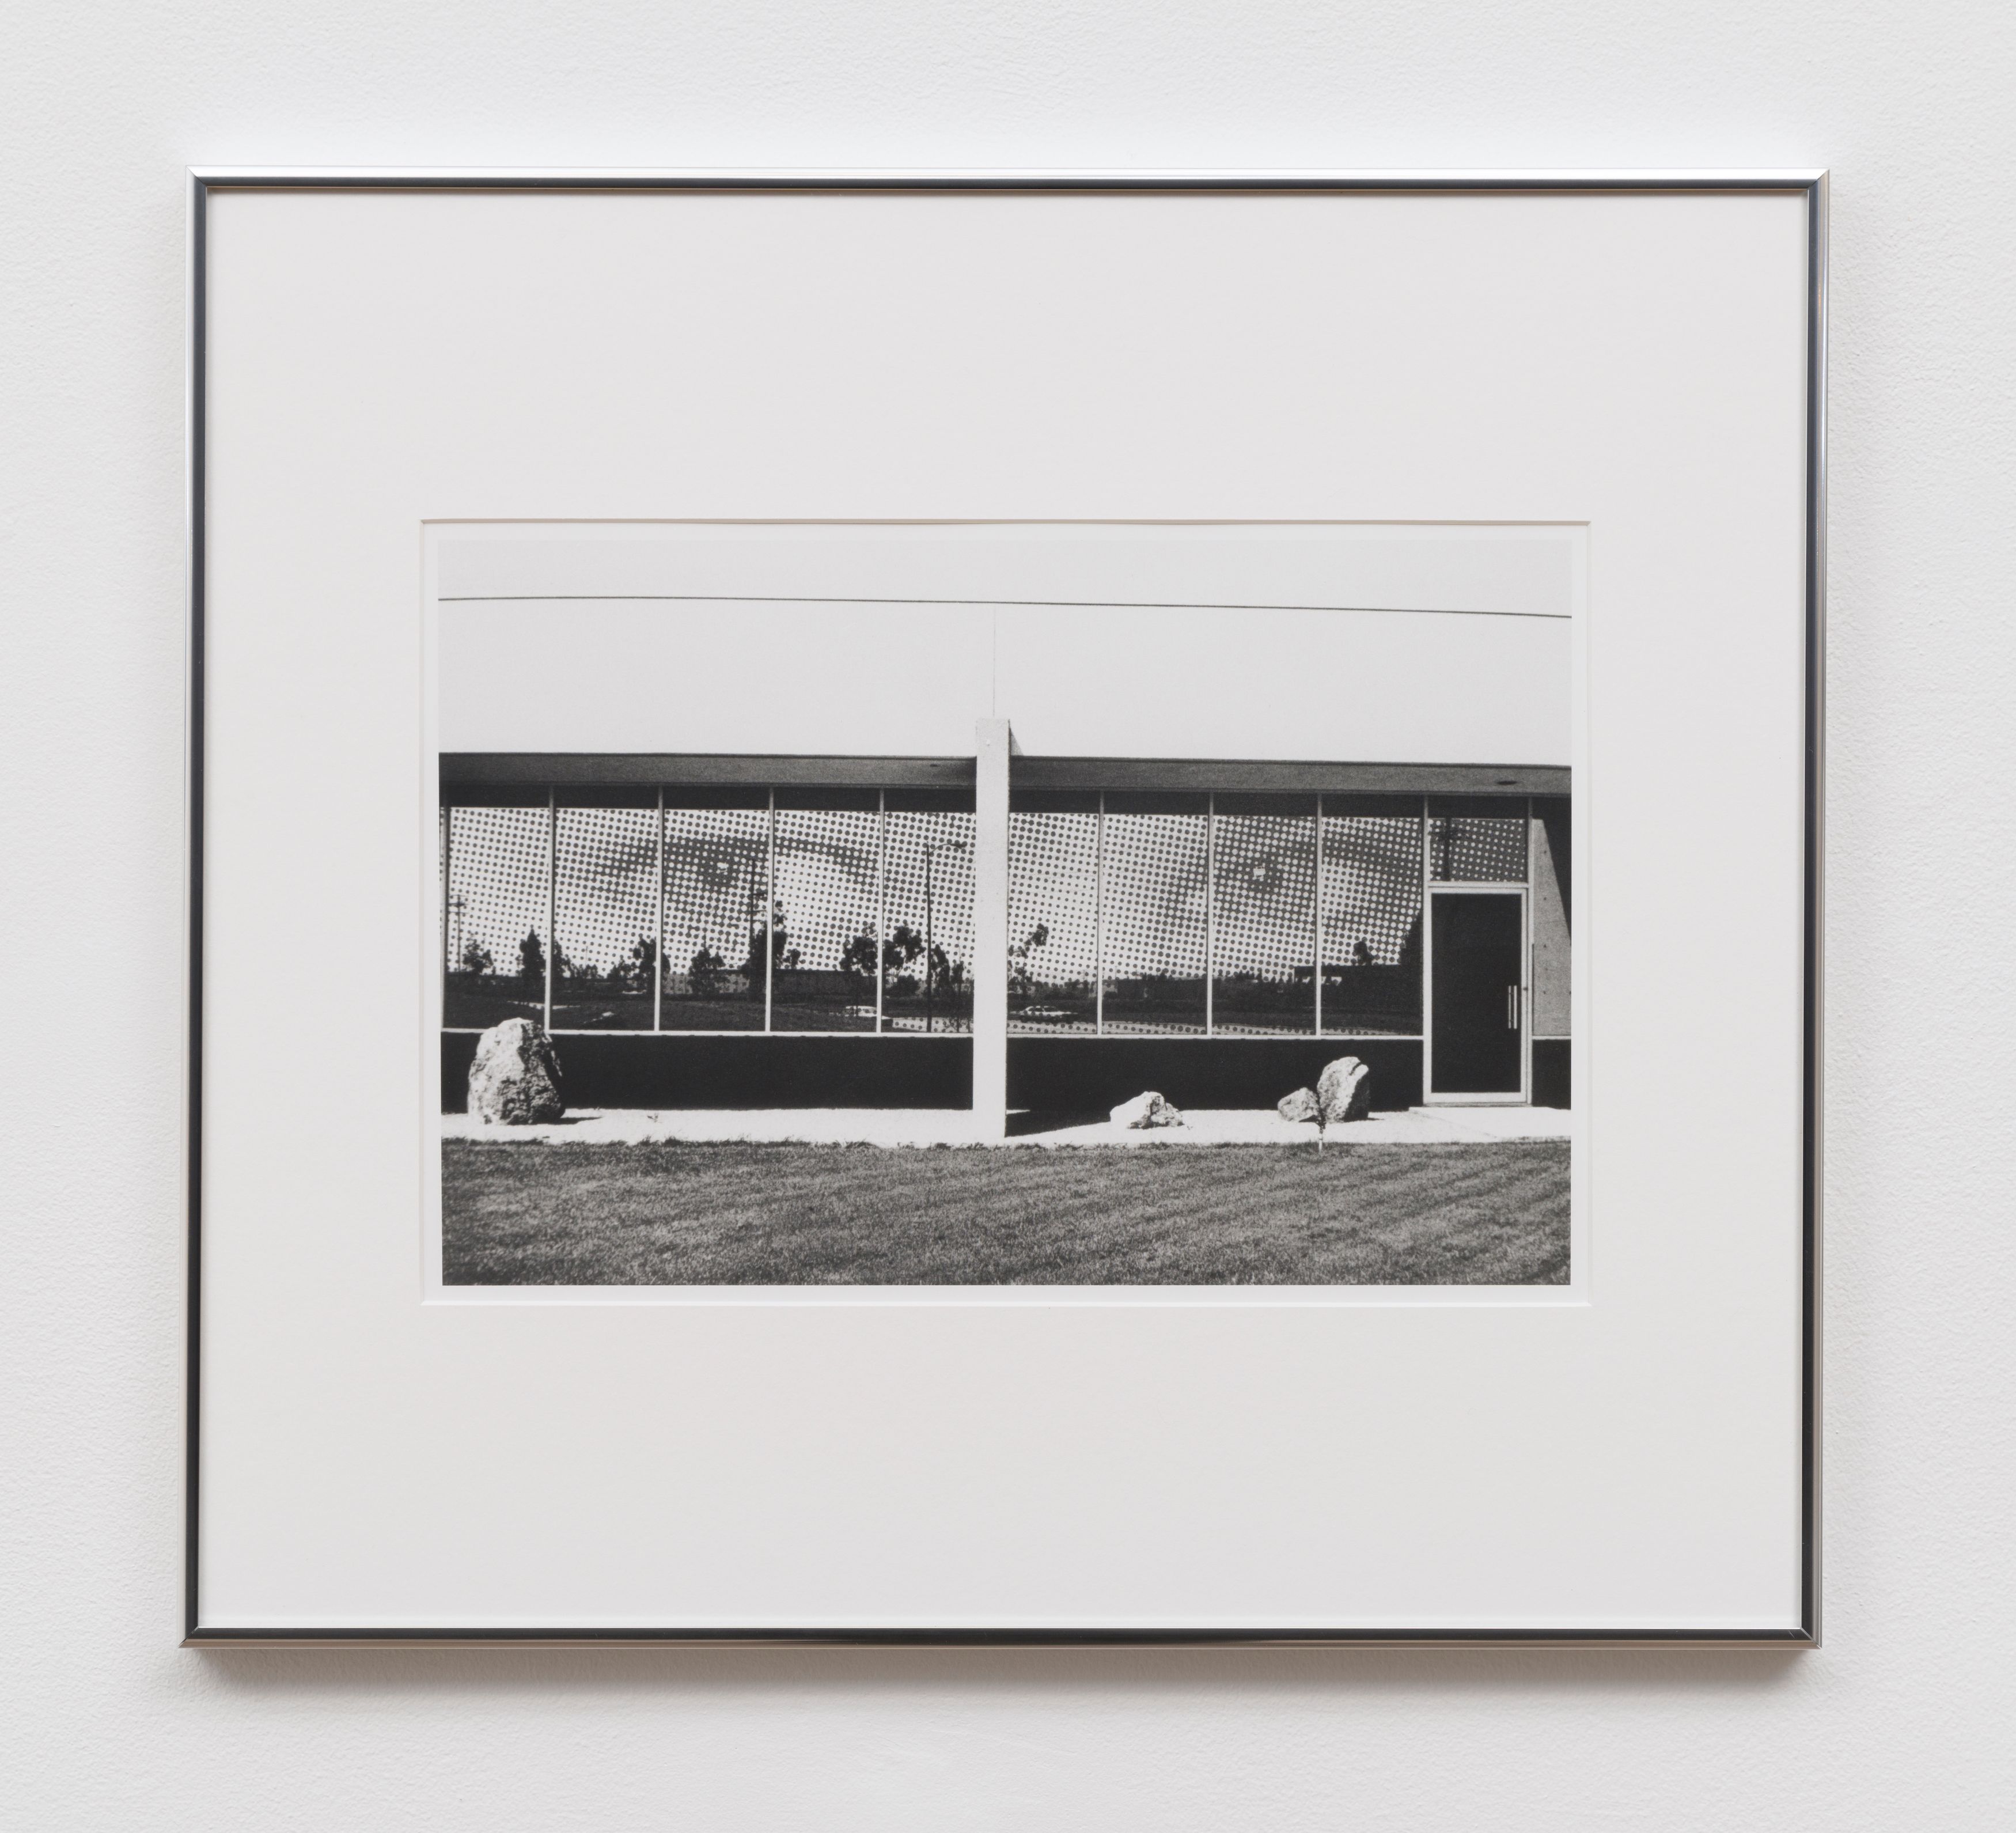 Erin Calla Watson, South Wall, Mazda Motors, 2121 East Main Street, 2023, gelatin silver print, 9 x 14 in. (22.81 x 35.56 cm) (image size), 18 x 20 in. (45.72 x 50.08 cm) (framed size), edition of 3 with 2 APErin Calla Watson, South Wall, Mazda Motors, 2121 East Main Street, 2023, gelatin silver print, 9 x 14 in. (22.81 x 35.56 cm) (image size), 18 x 20 in. (45.72 x 50.08 cm) (framed size) Edition of 3 with 2 AP